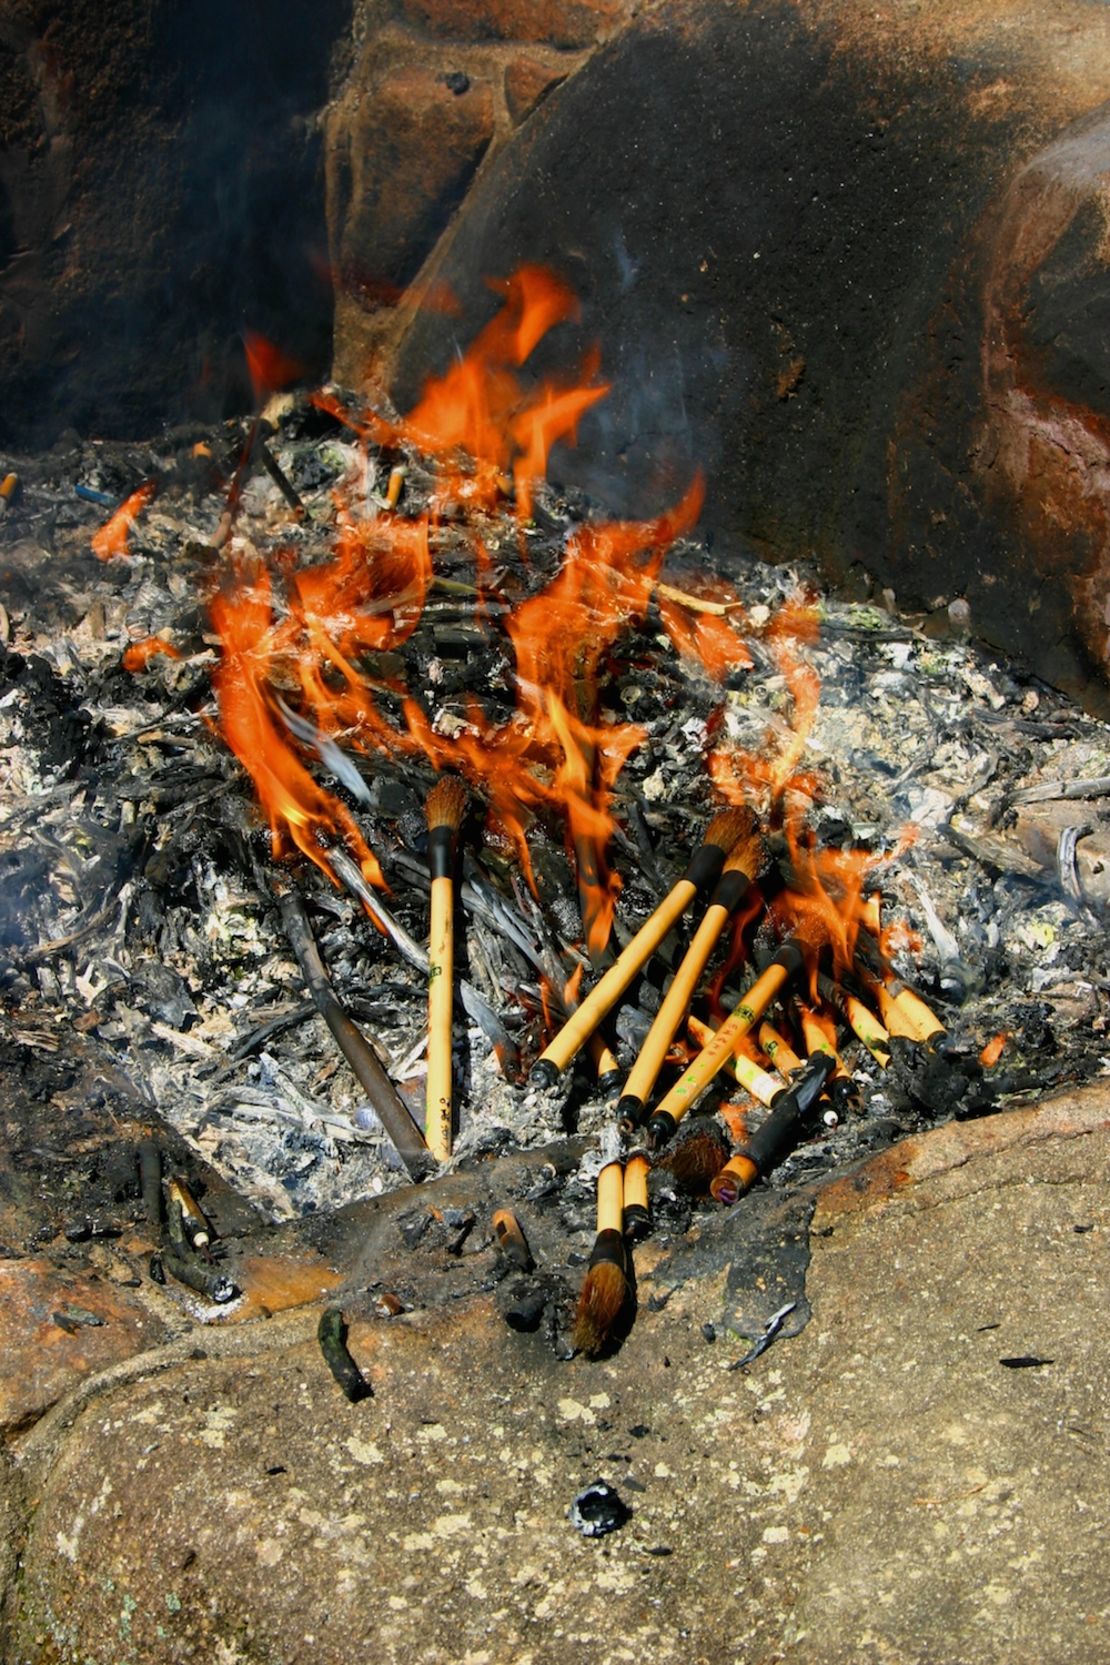 Every year, used brushes from all over Japan are brought to Kumano to be thrown onto a pyre. 